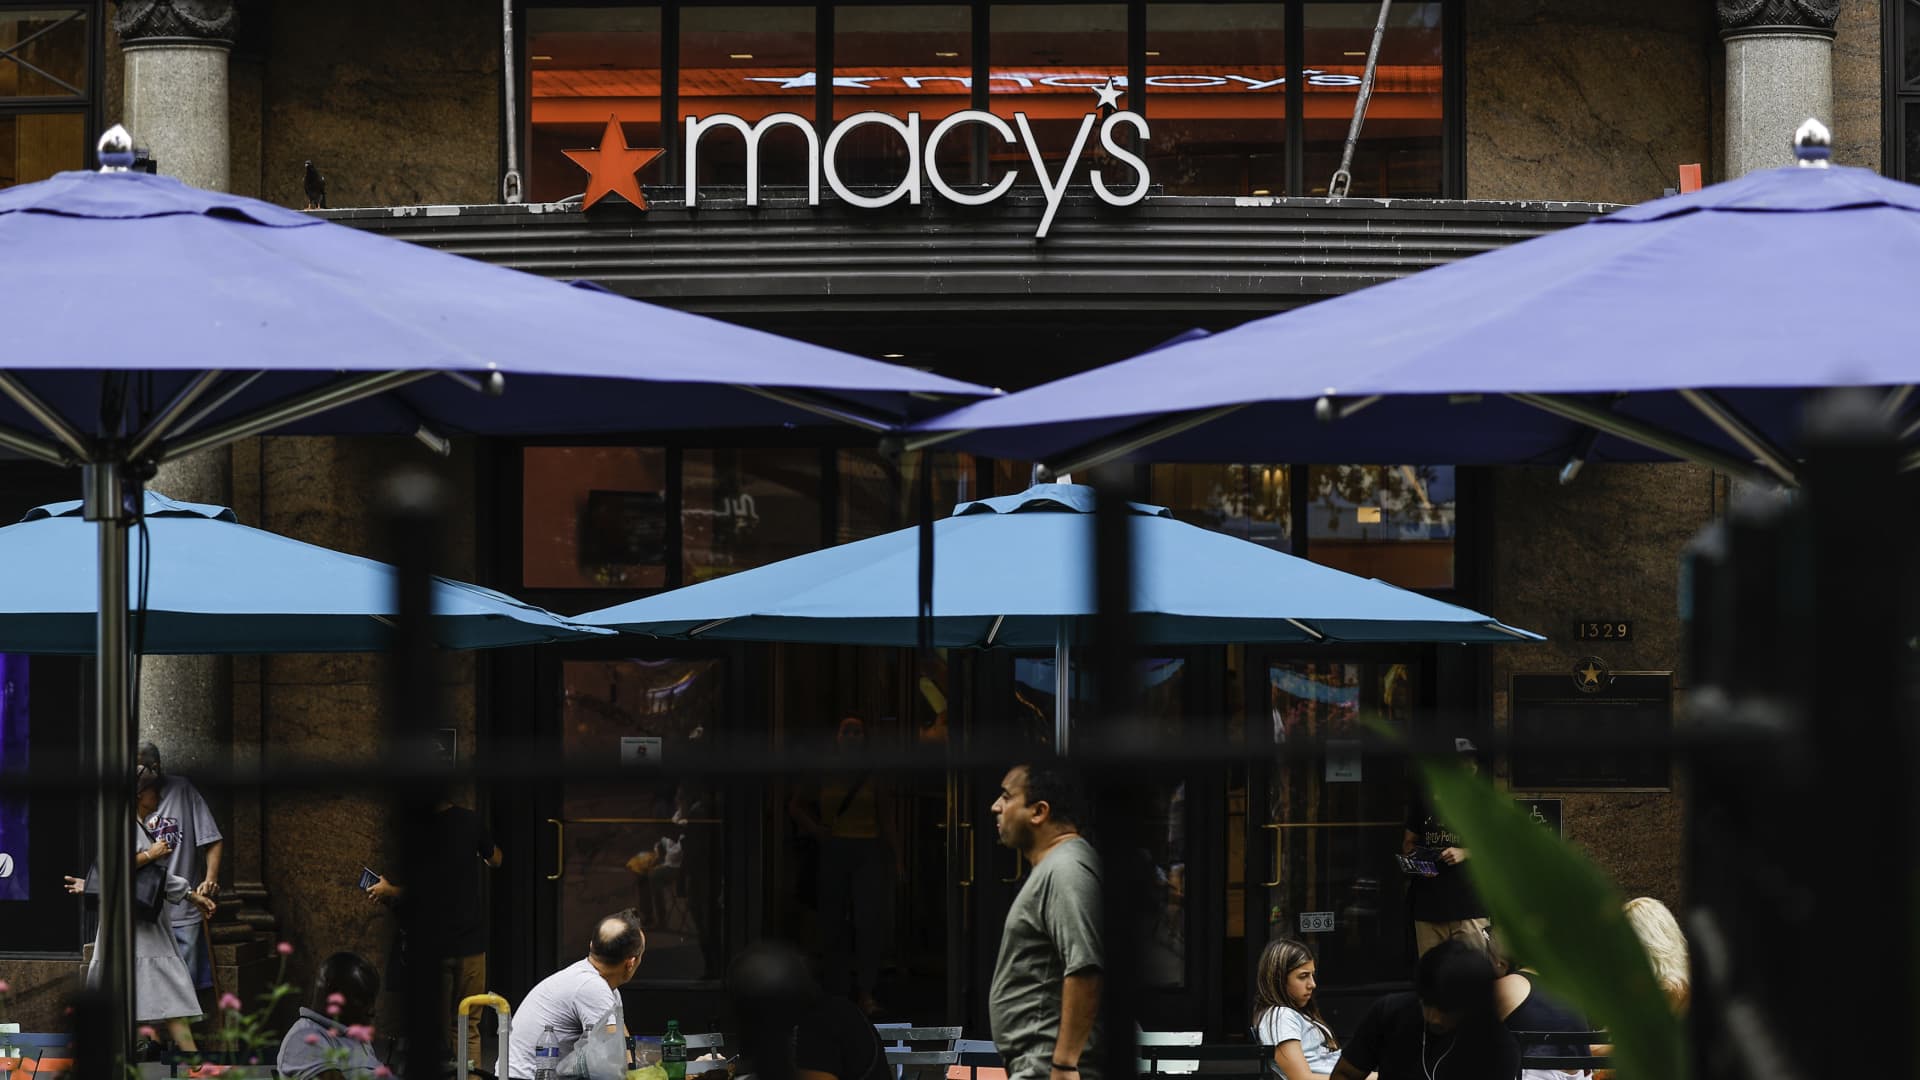 Macy’s to open four more smaller shops, as strip mall experiment shows early signs of success